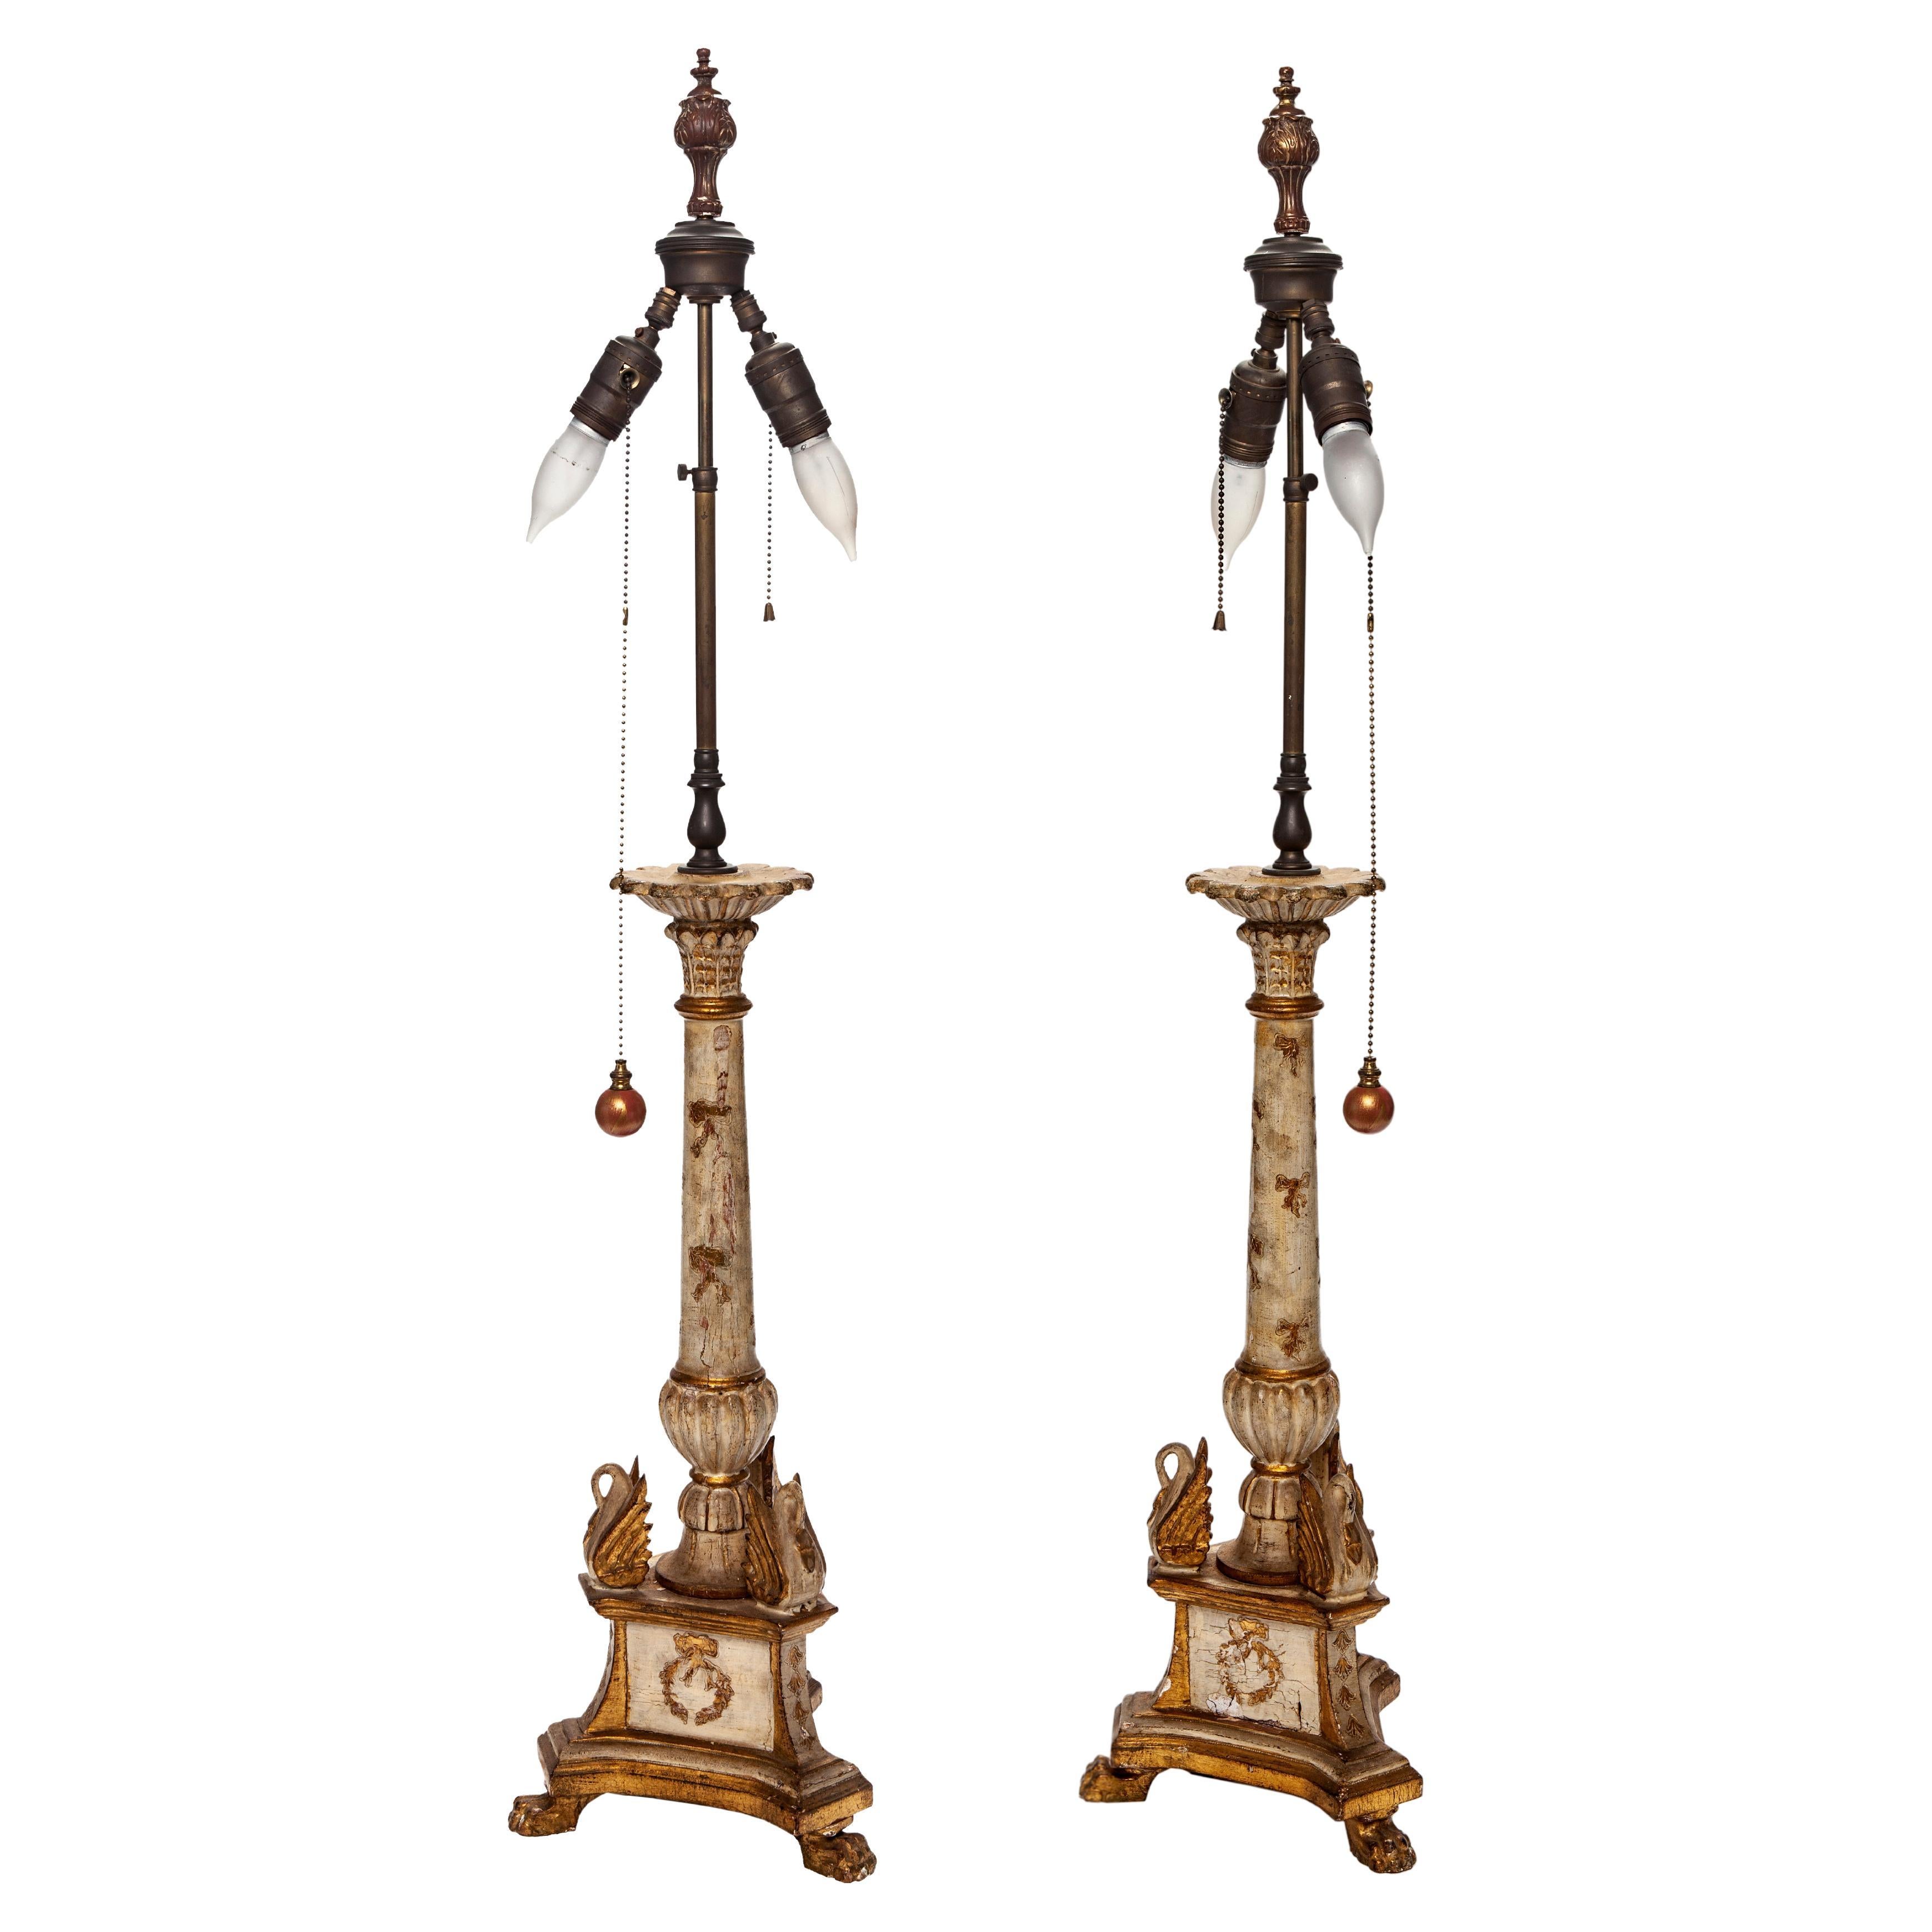 Florentine Wood Candlestick Lamps, a Pair For Sale